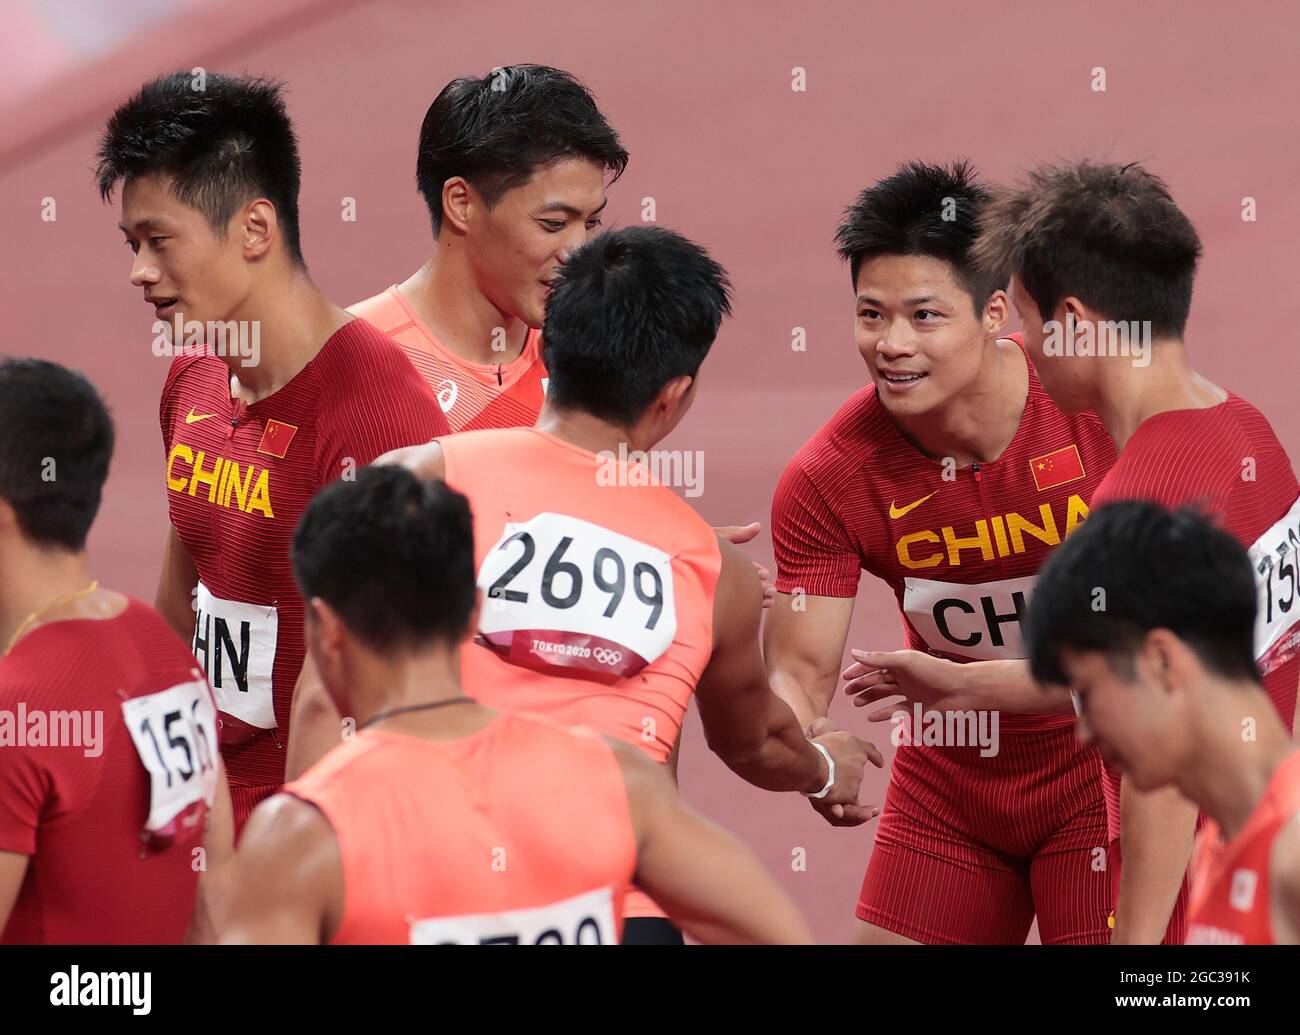 Tokyo, Japan. 6th Aug, 2021. Members of Team China and Team Japan salute each other after the men's 4x100m relay final at Tokyo 2020 Olympic Games, in Tokyo, Japan, Aug. 6, 2021. Credit: Li Gang/Xinhua/Alamy Live News Stock Photo